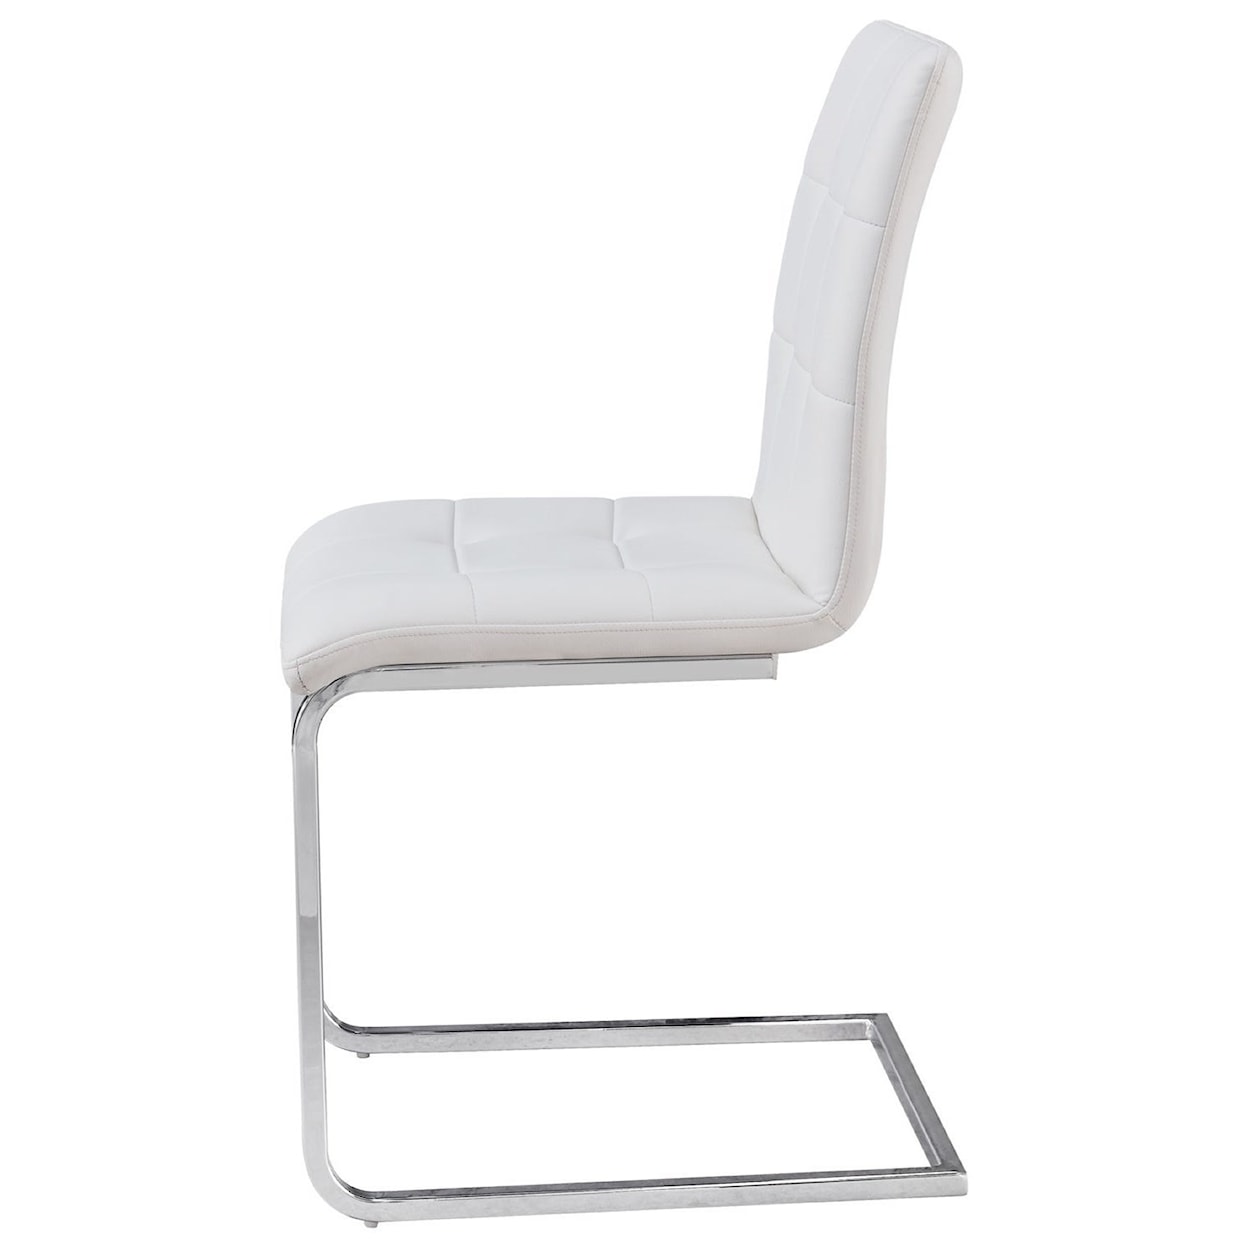 Steve Silver Escondido Dining Side Chair